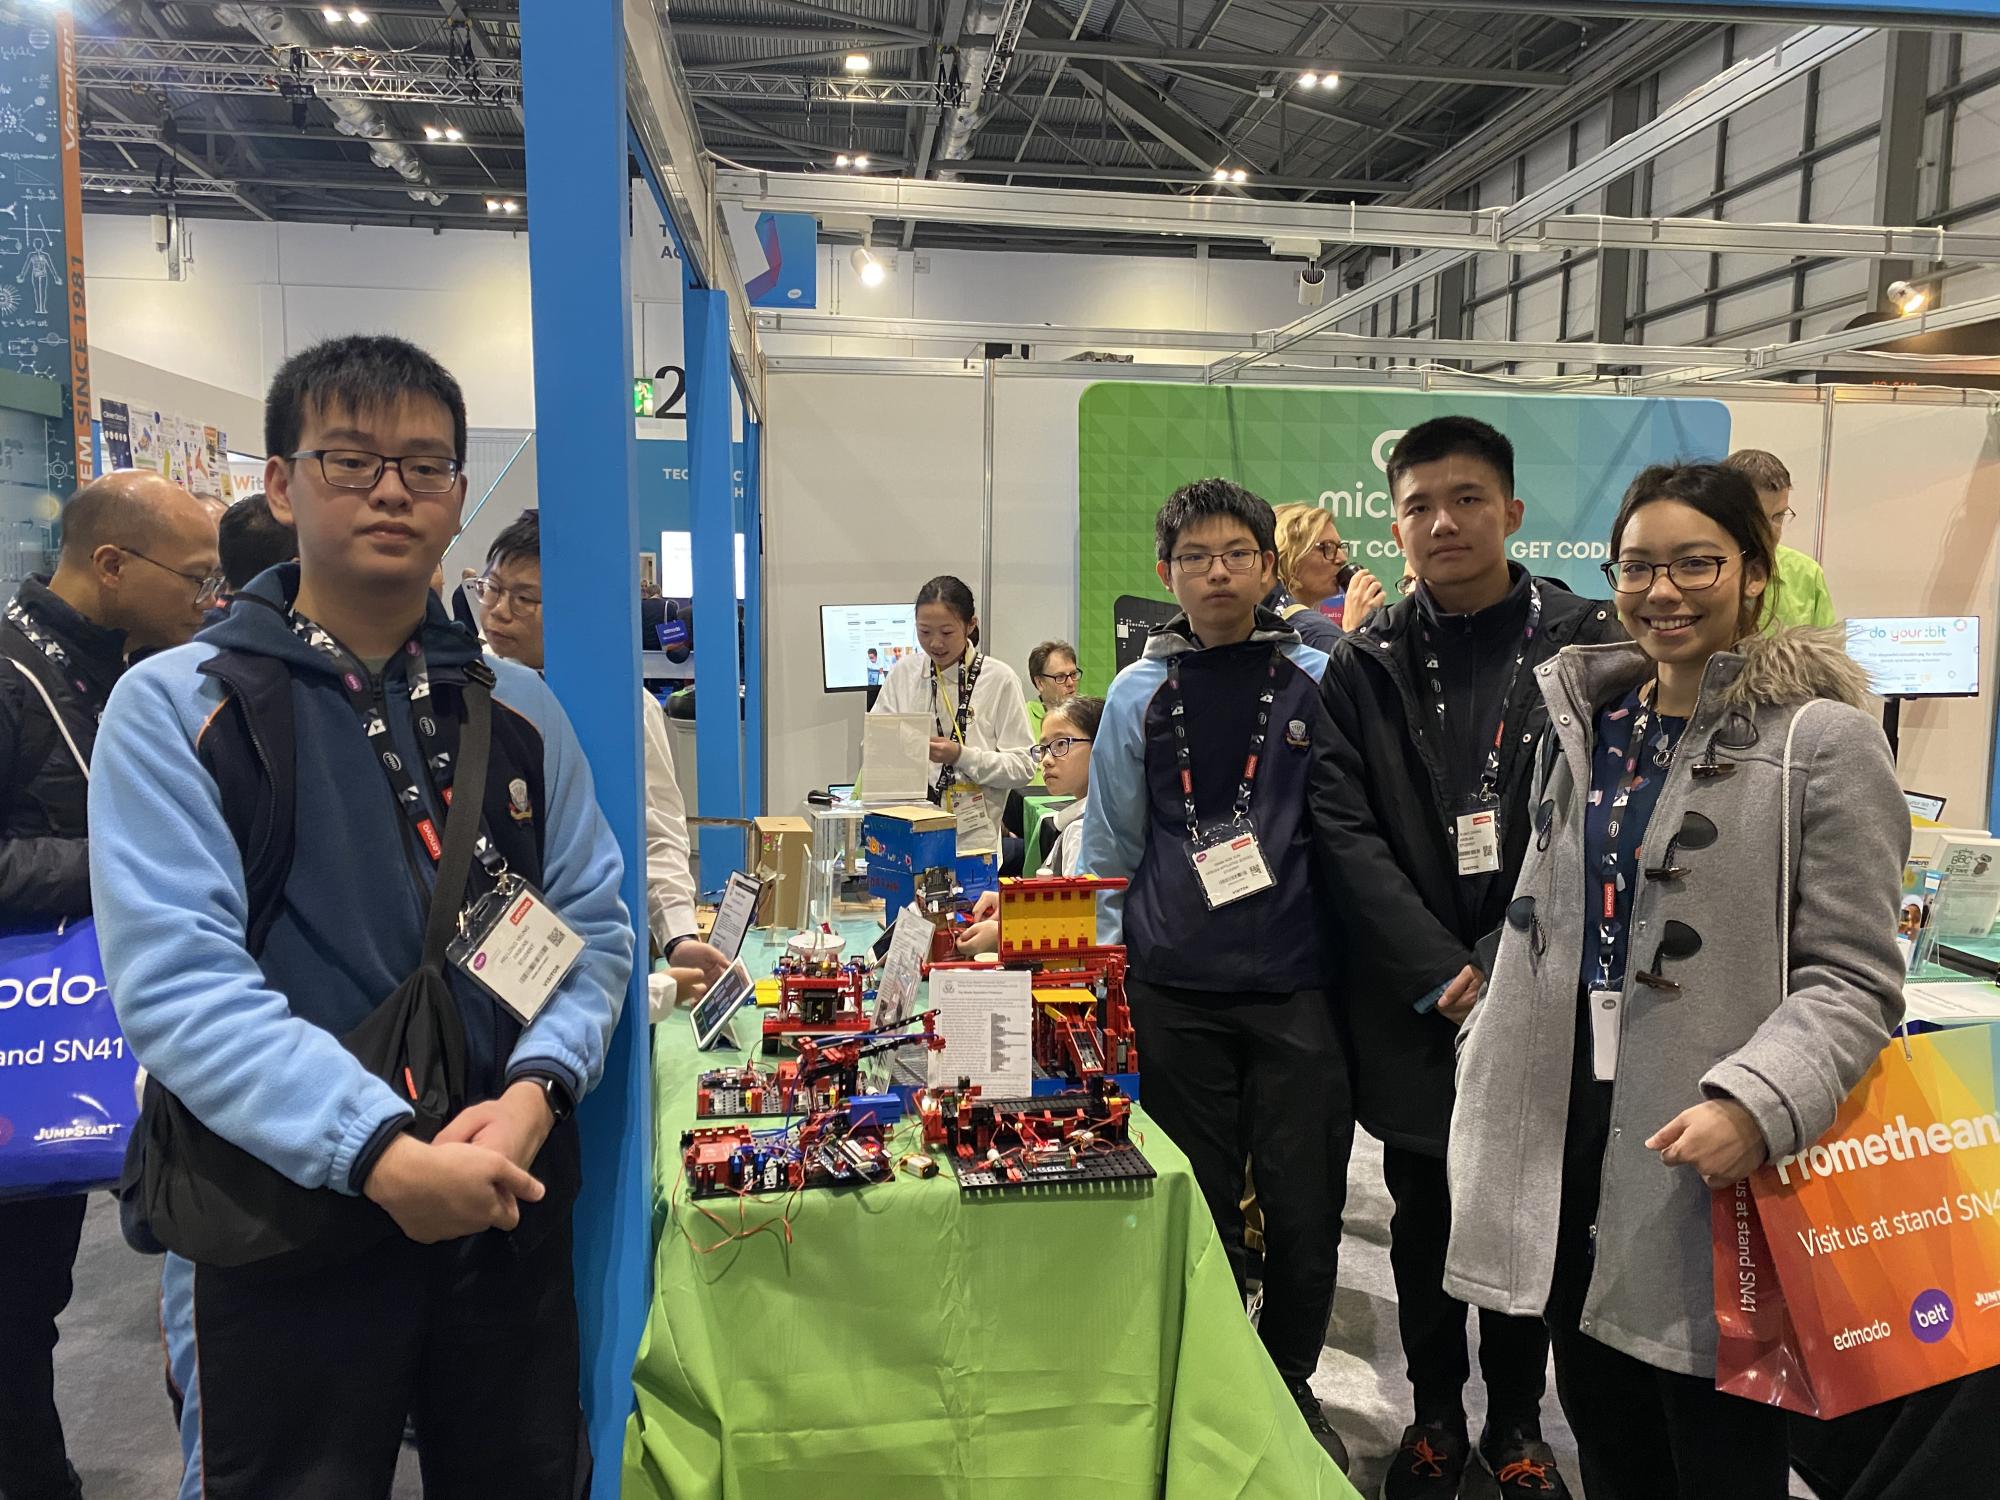 Students showcased their project works in the Bett Show in UK. 